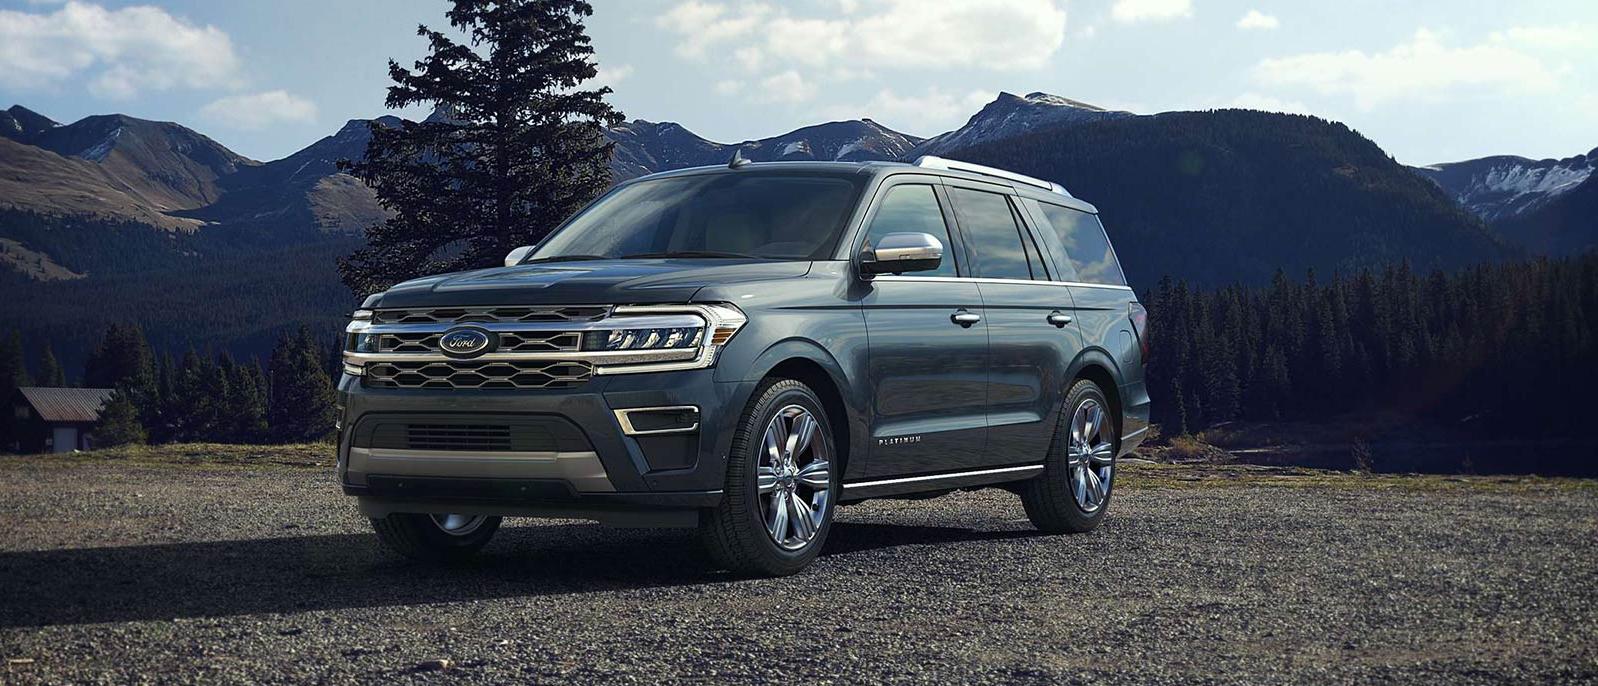 2022 Ford Expedition is parked on the land with mountains scenarios in the background.